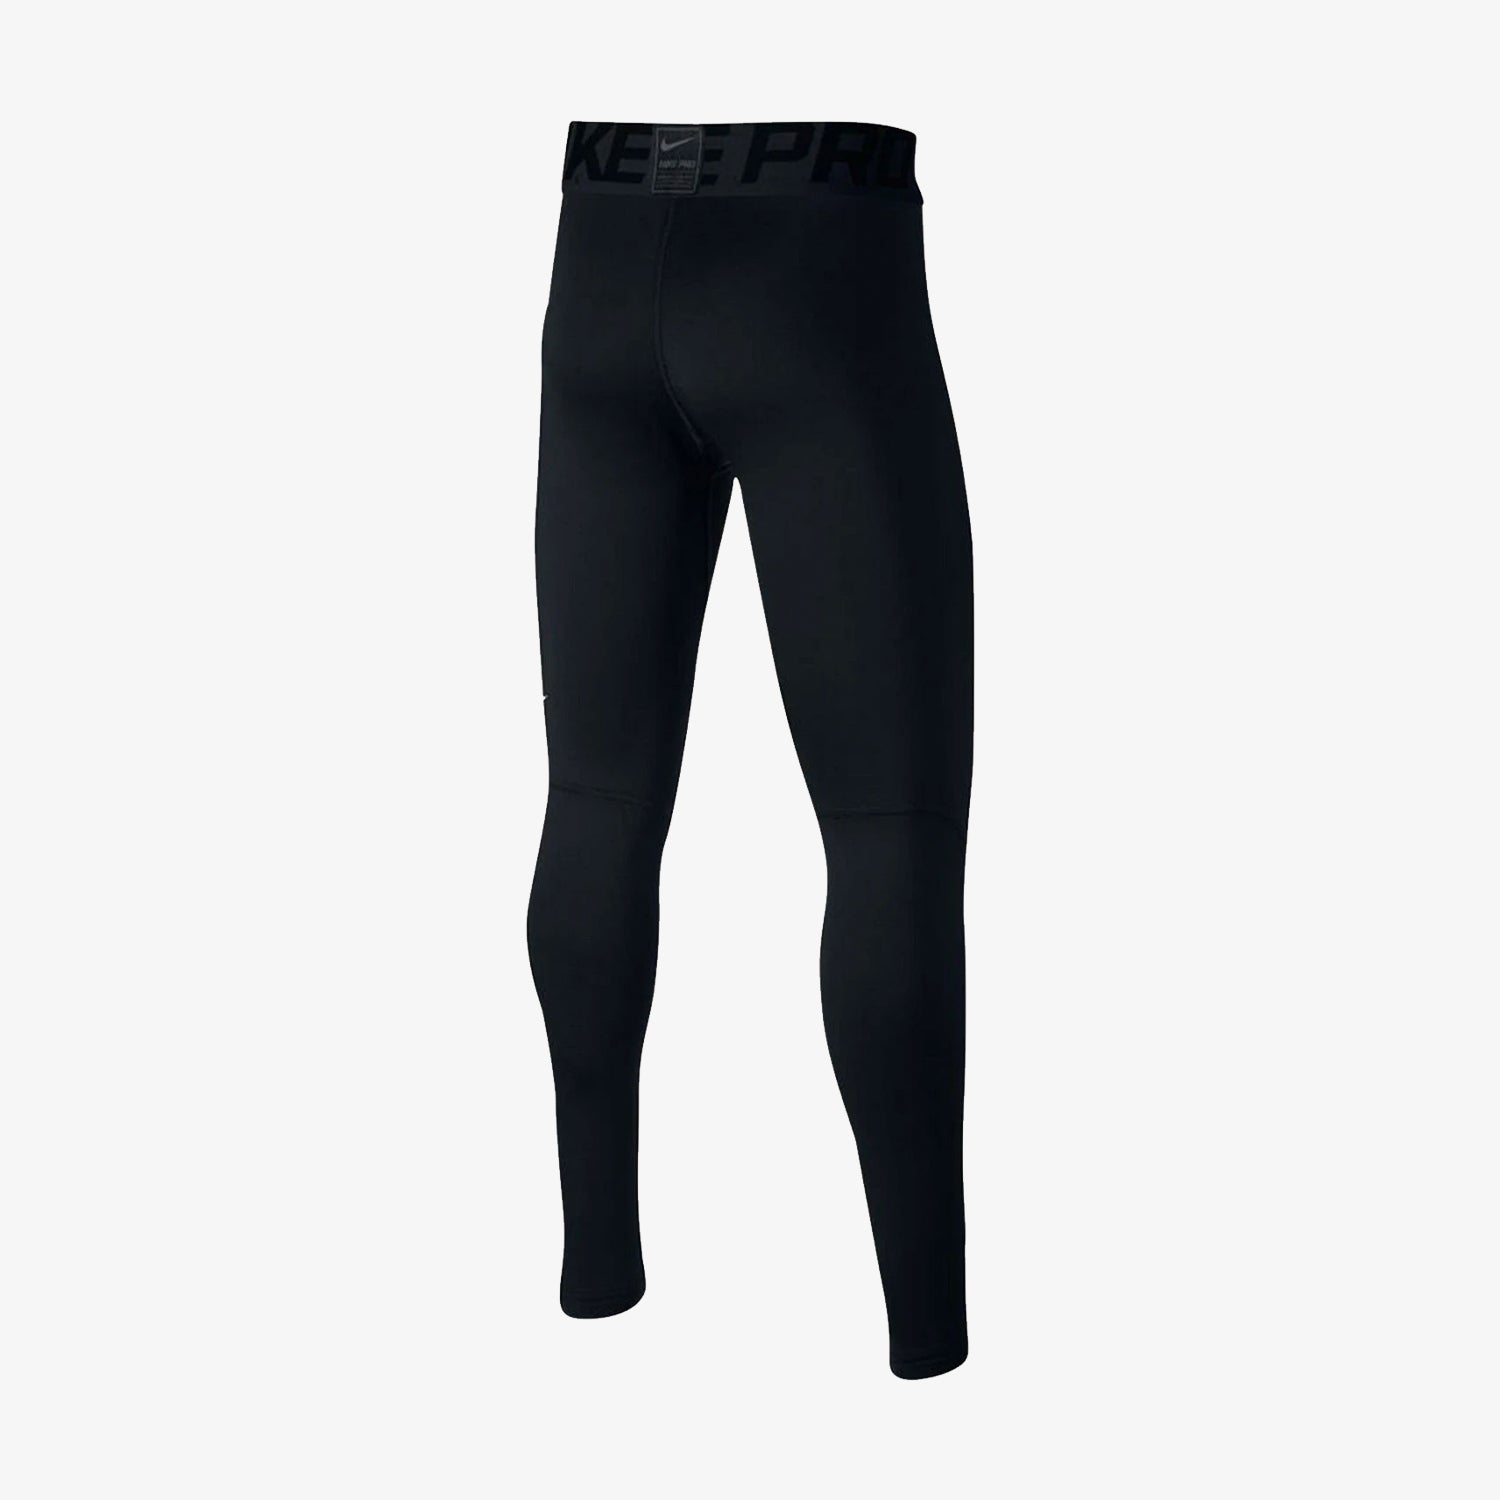 Youth Pro Warm Training Tights -